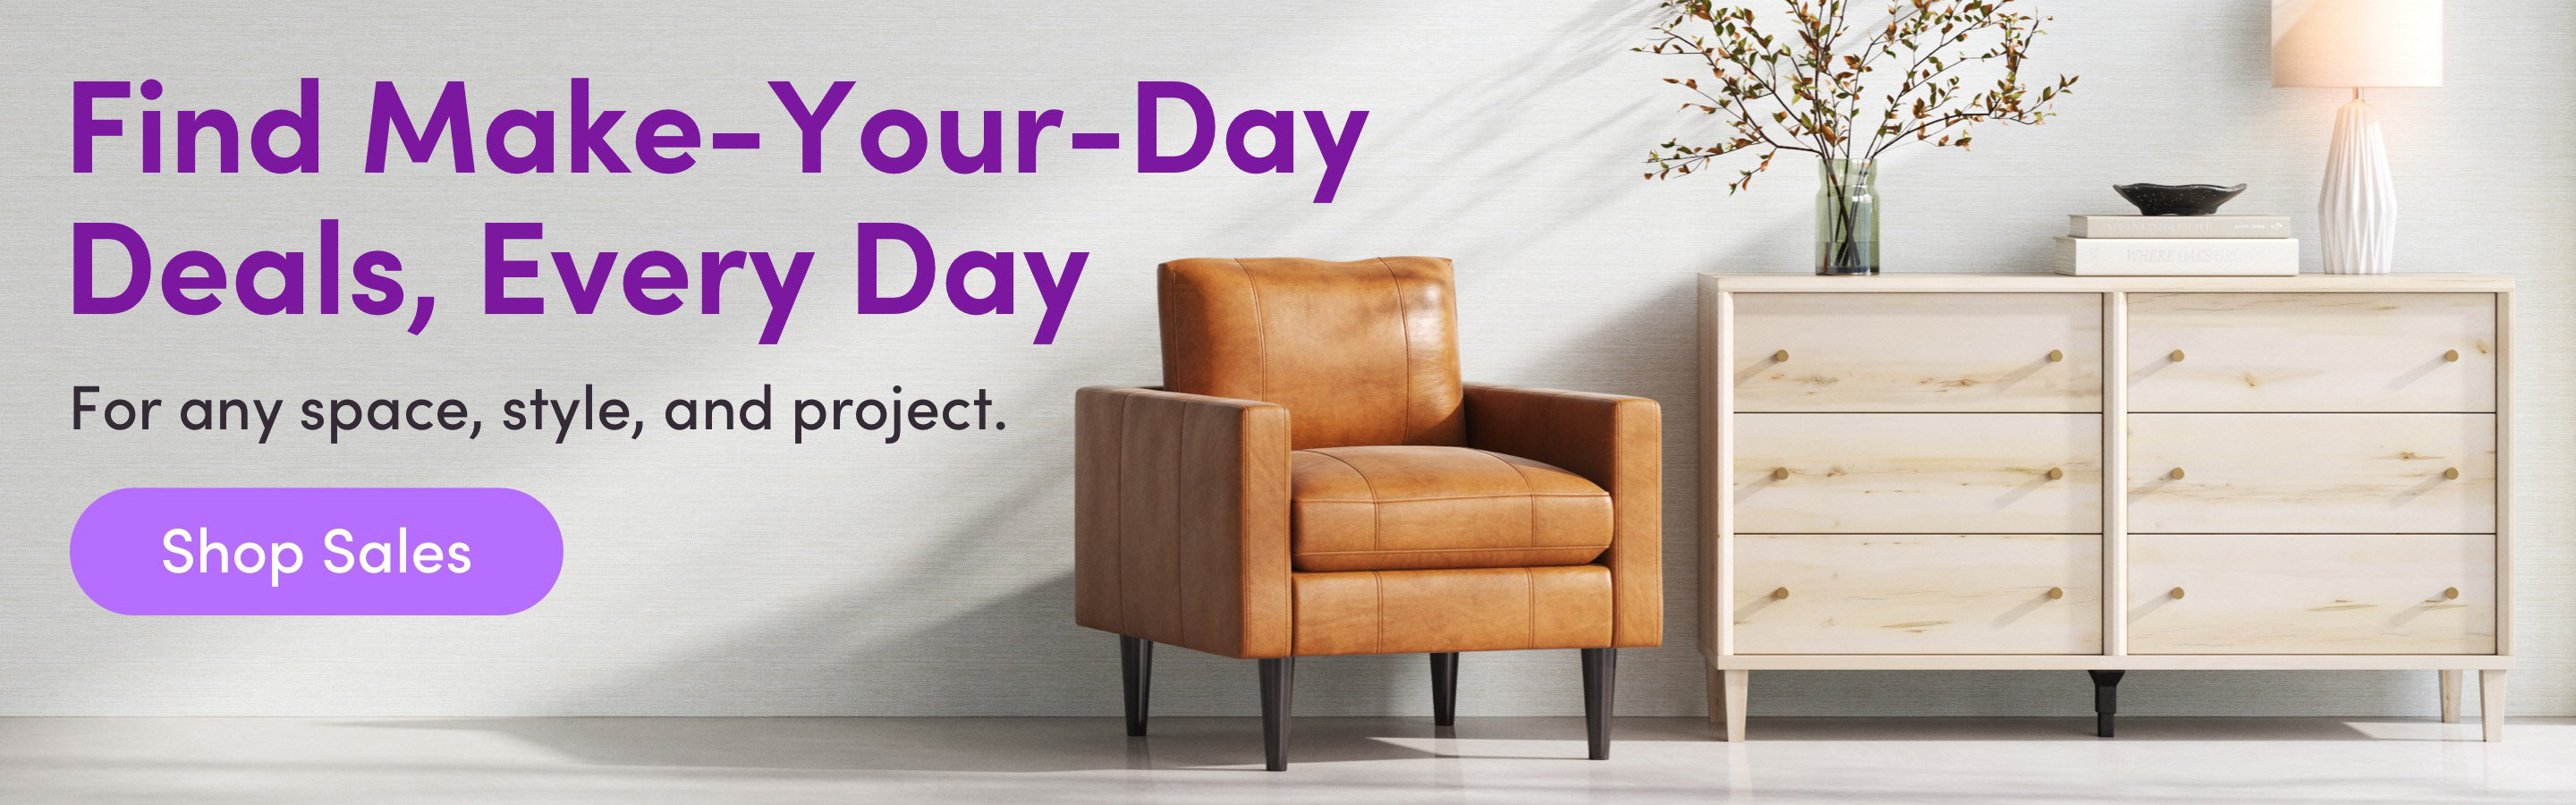 Find Make-You-Day Deals, Every Day For any space, style, and project. Shop Sale